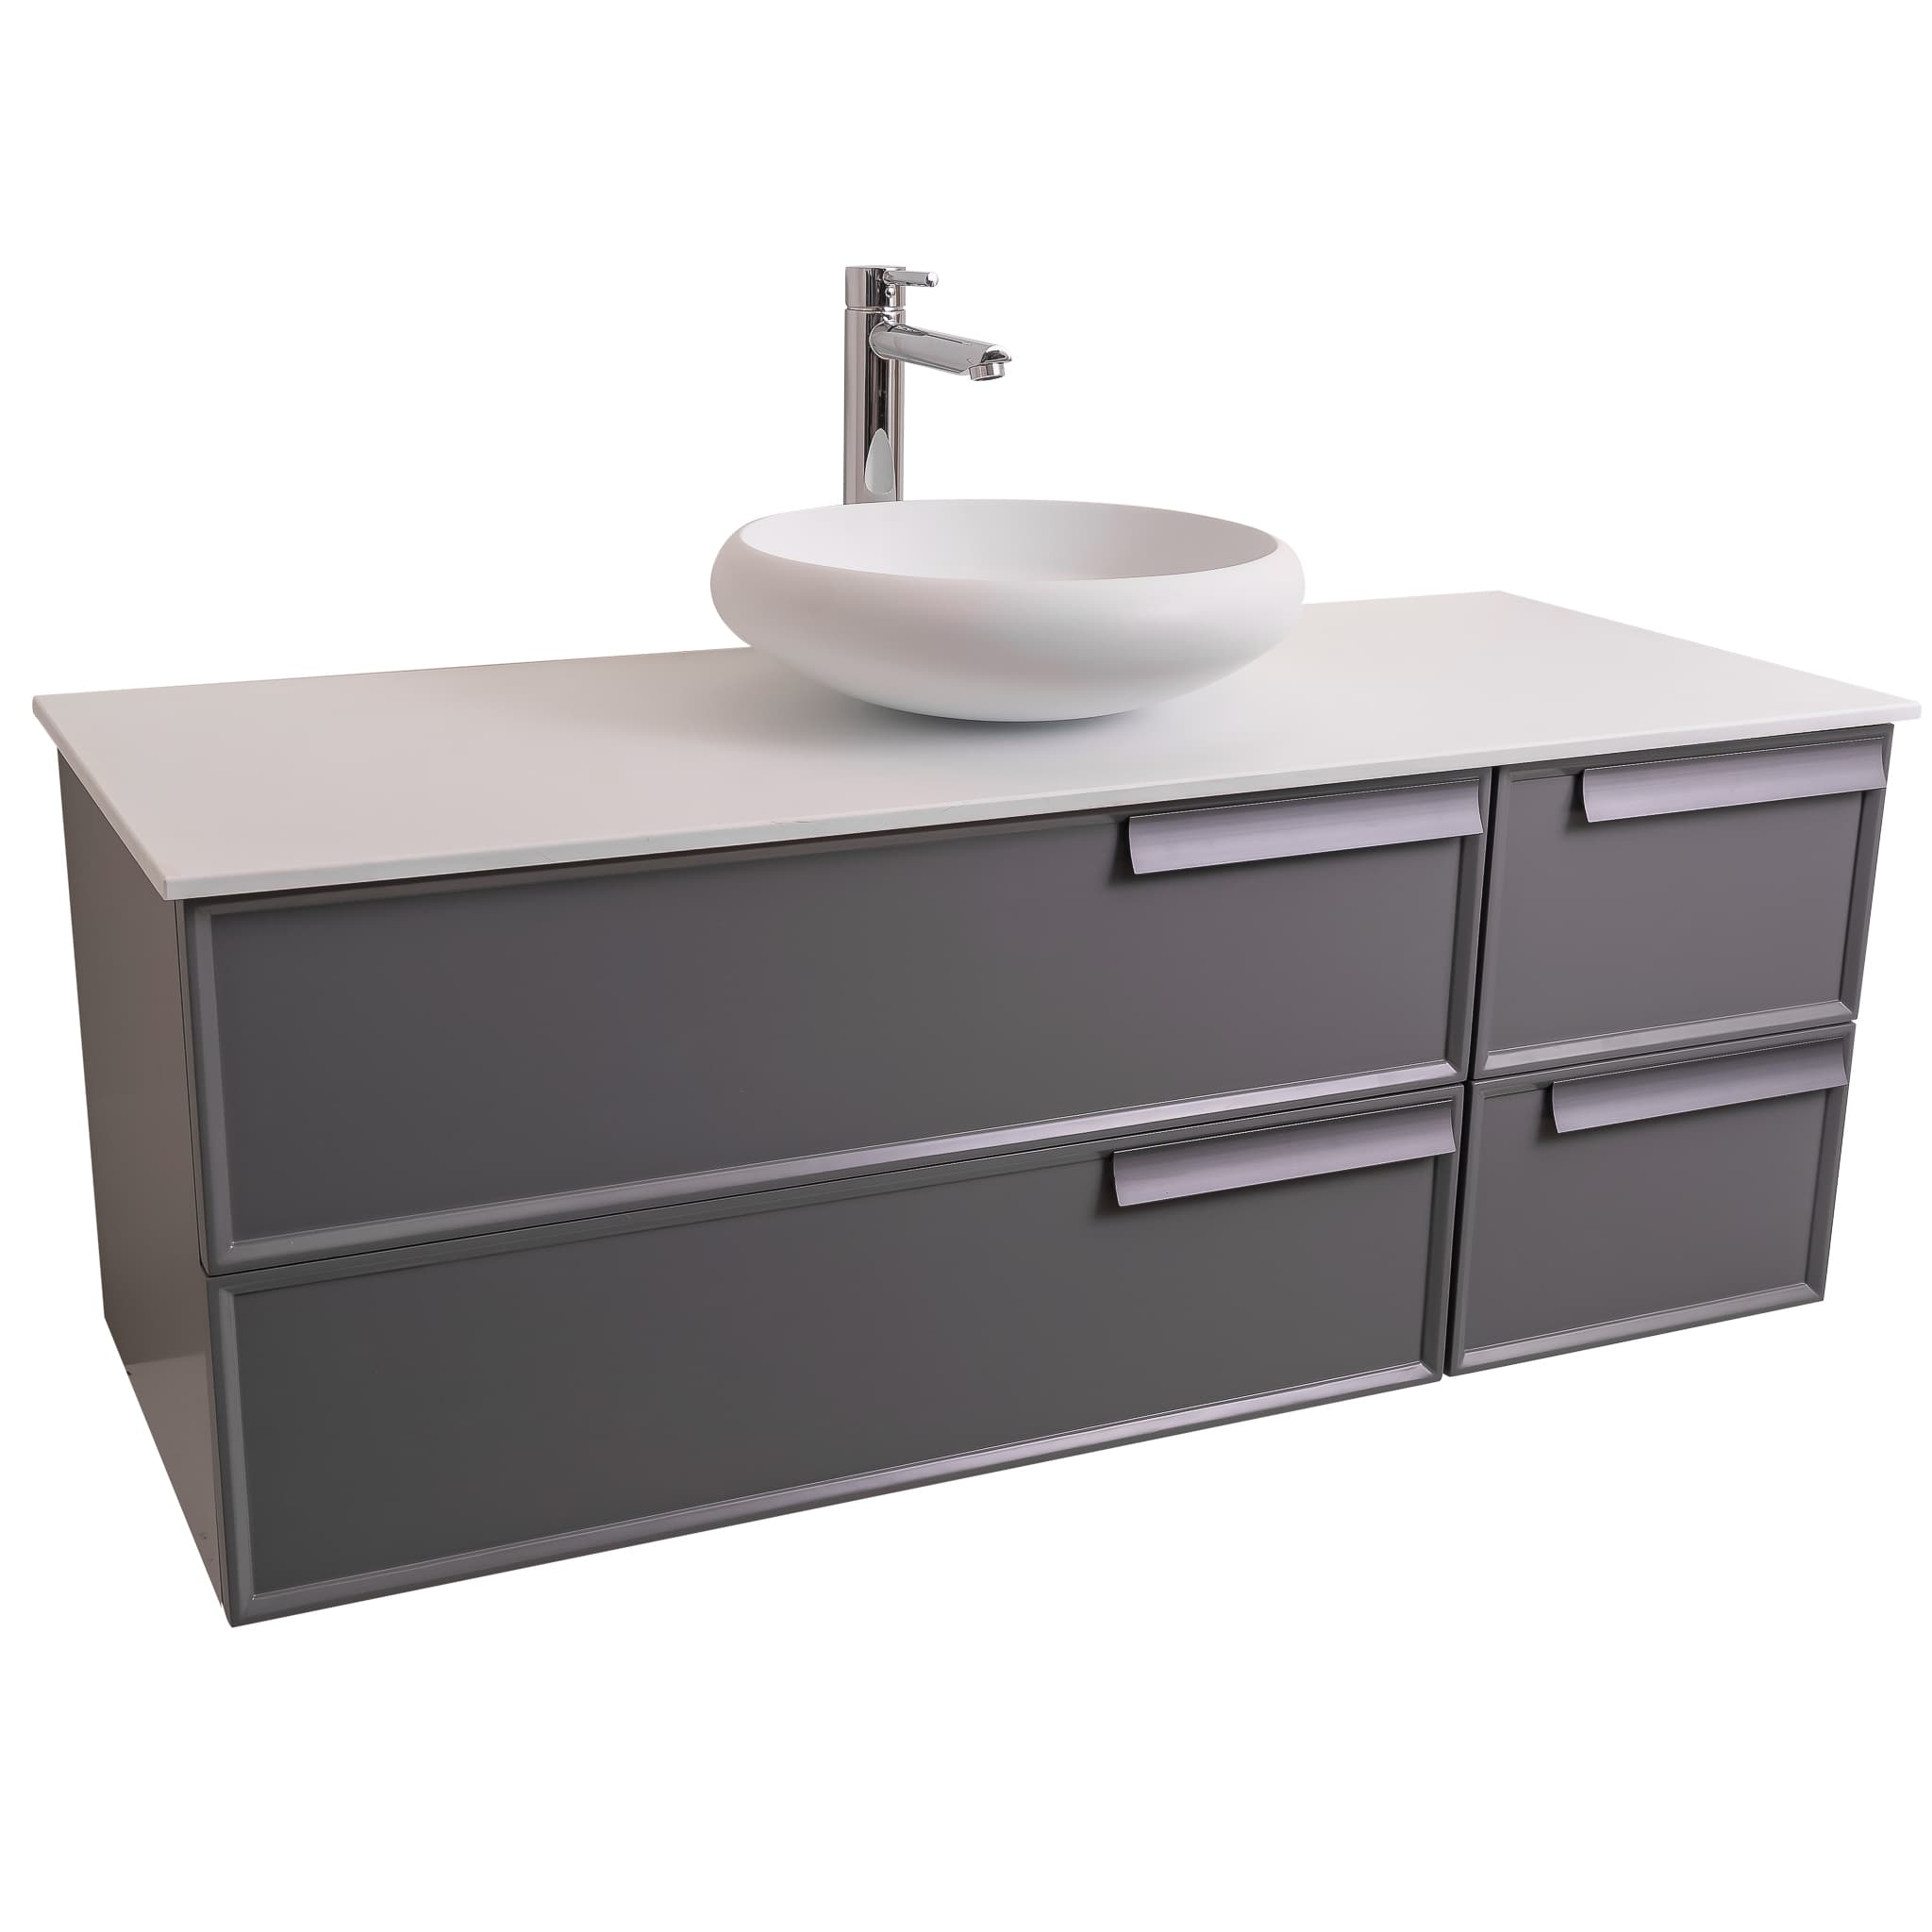 Garda 47.5 Matte Grey Cabinet, Solid Surface Flat White Counter and Round Solid Surface White Basin 1153, Wall Mounted Modern Vanity Set